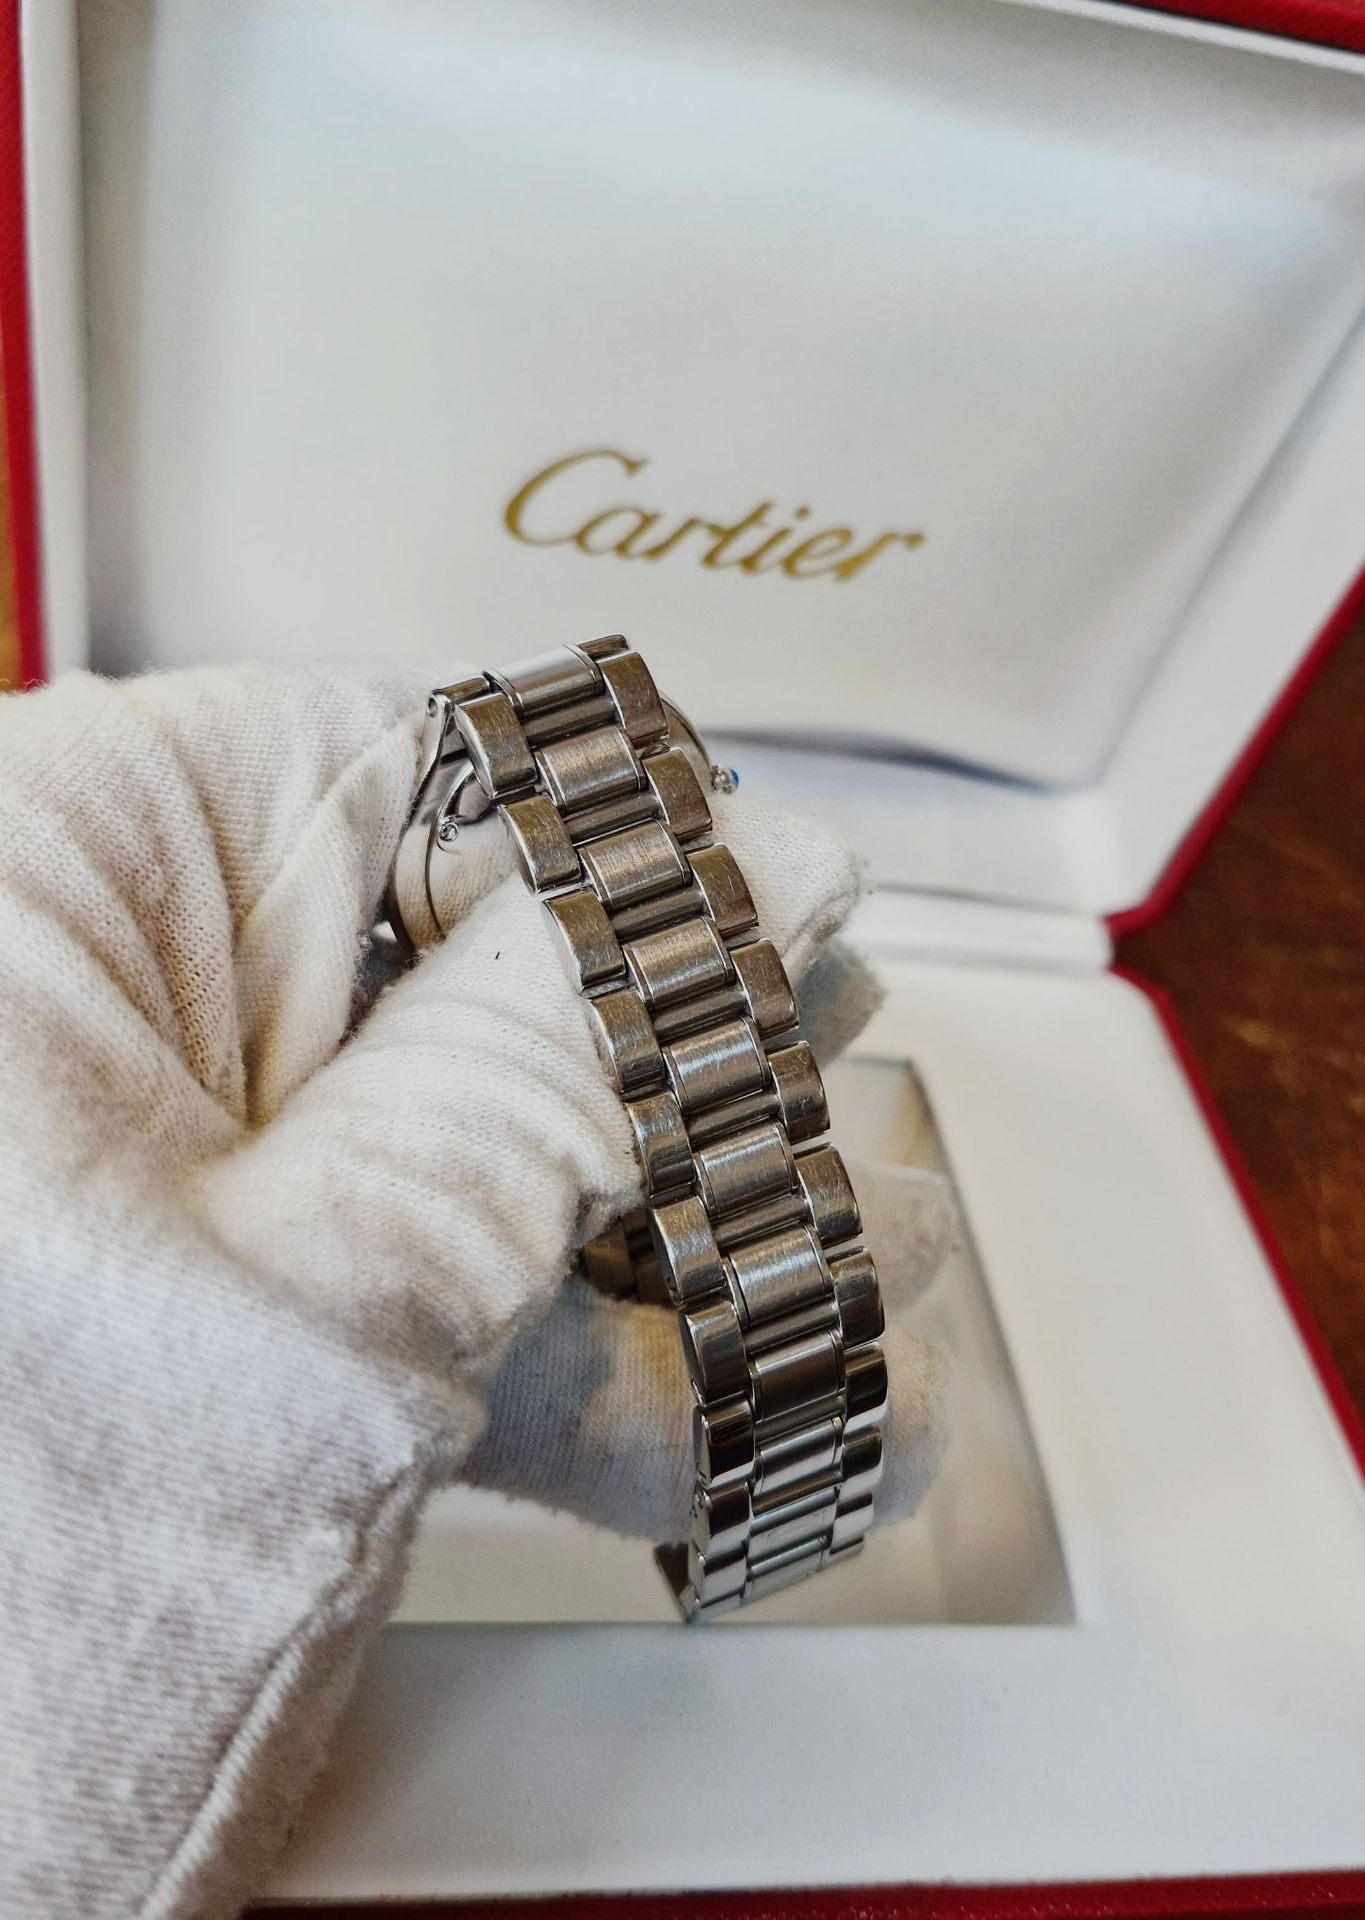 Cartier Ladies Watch Stainless Steel, Box & Papers, NO VAT - Image 5 of 9